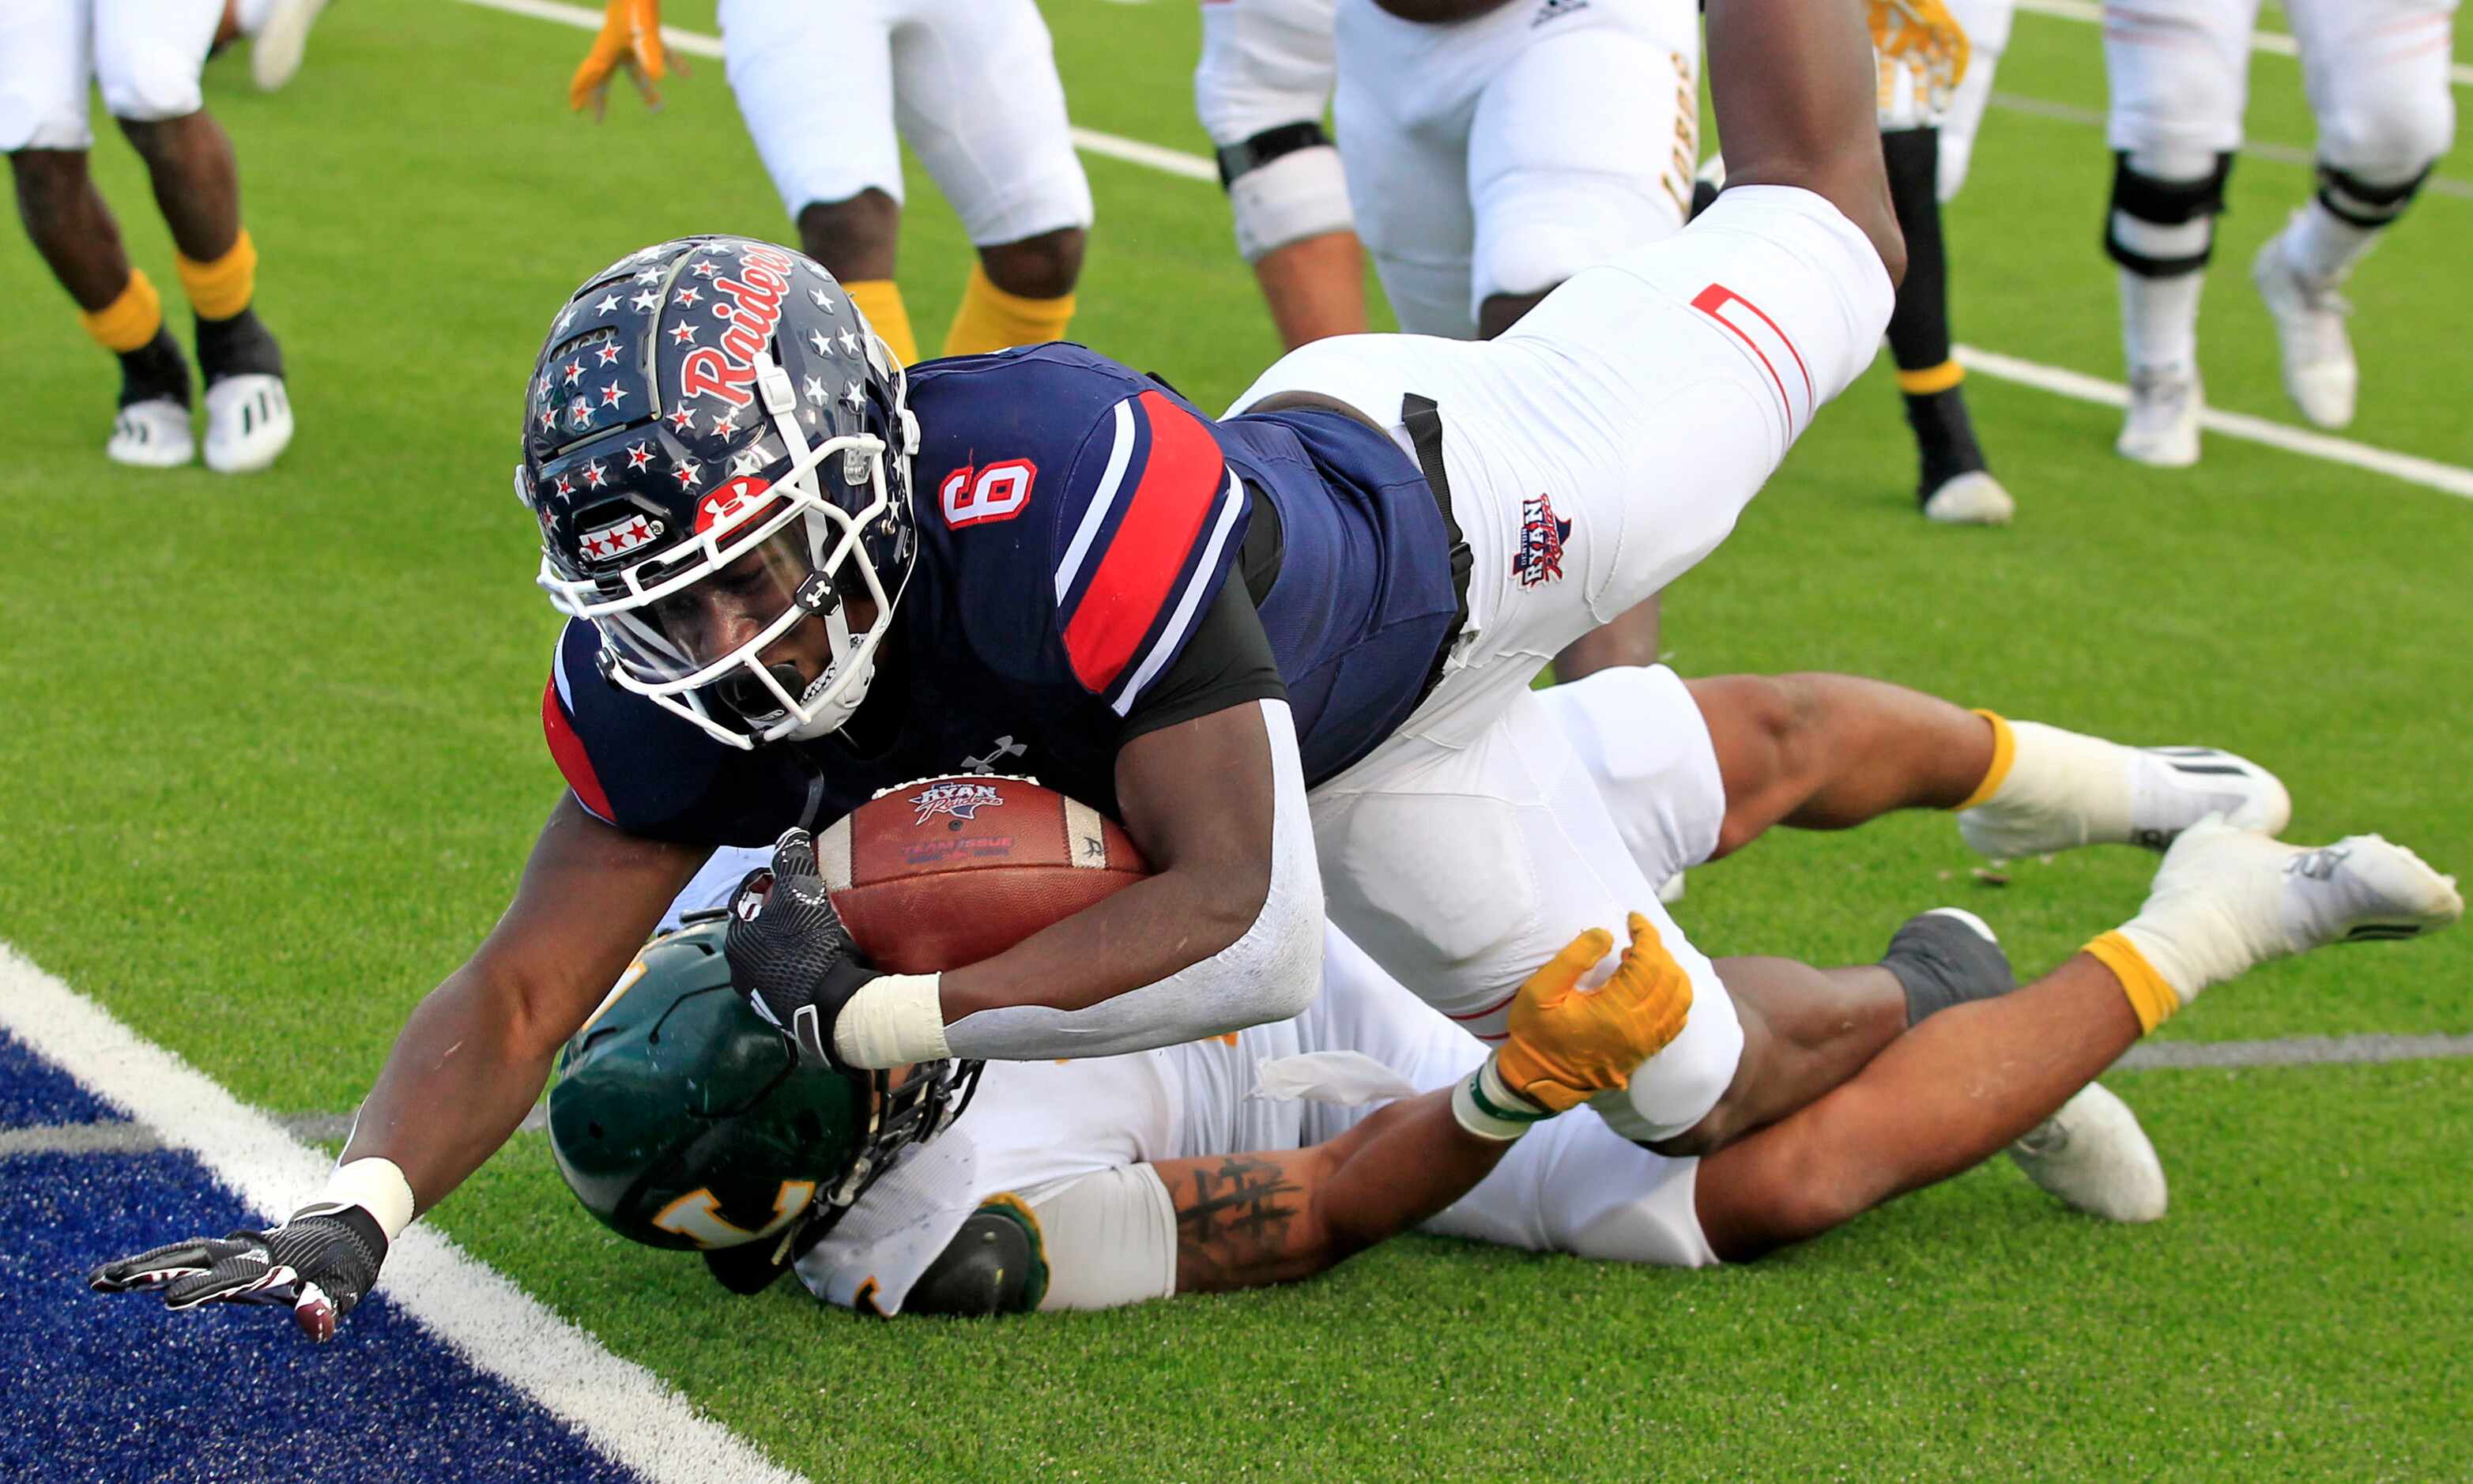 Denton Ryan RB Anthony Hill Jr. (6) runs over a Longview defender in route to a touchdown...